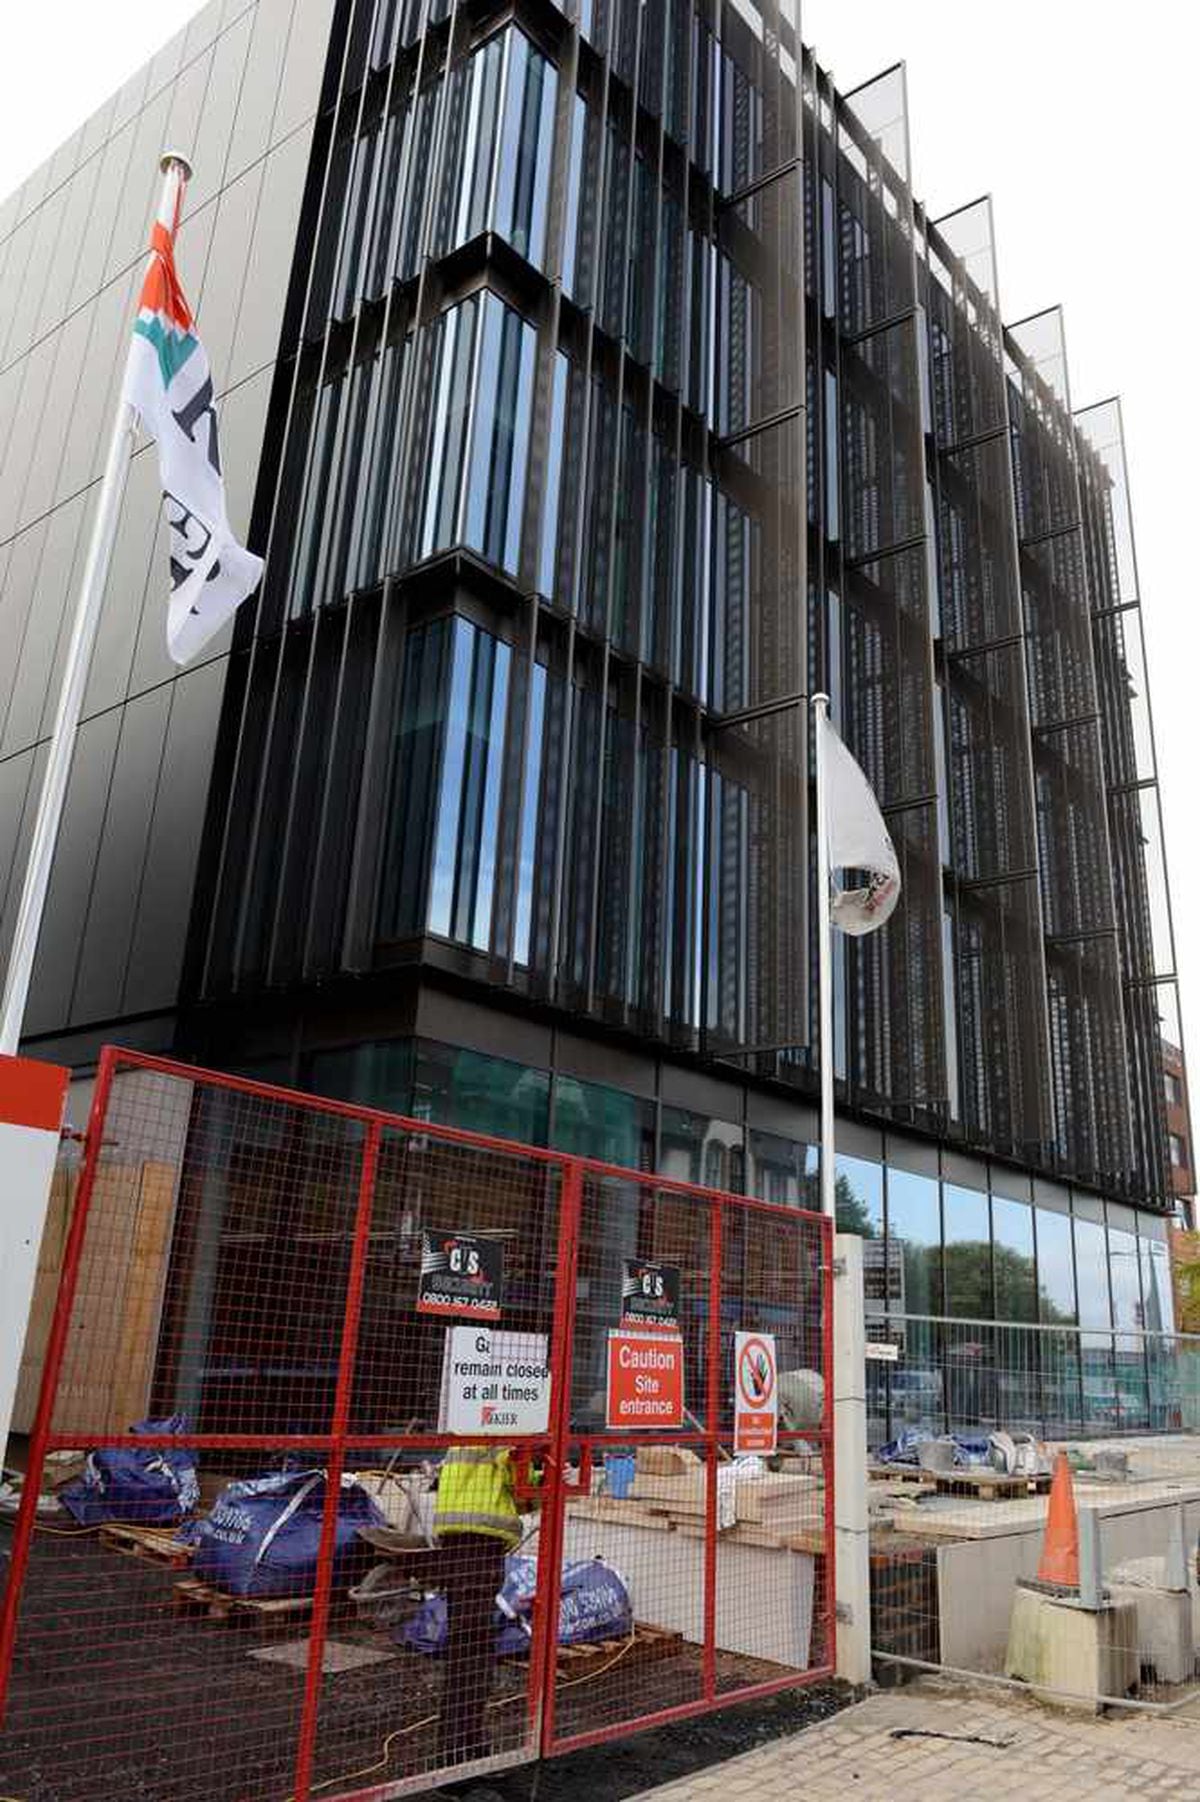 The new science block at the University of Wolverhampton under construction